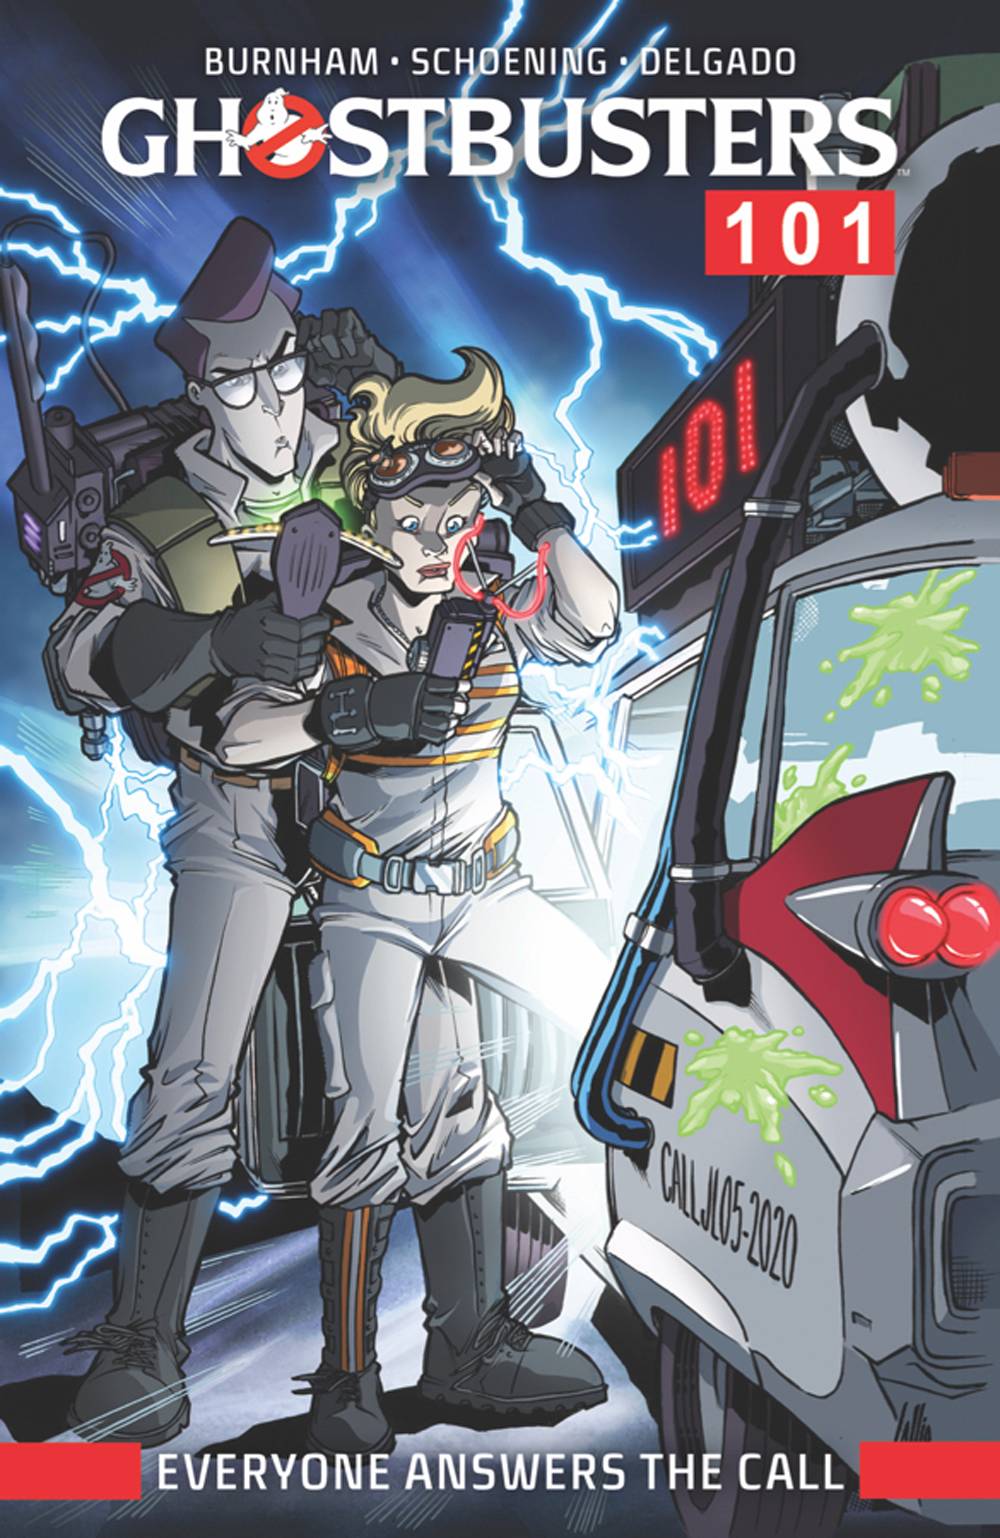 Ghostbusters 101 - Everyone Answers the Call TP